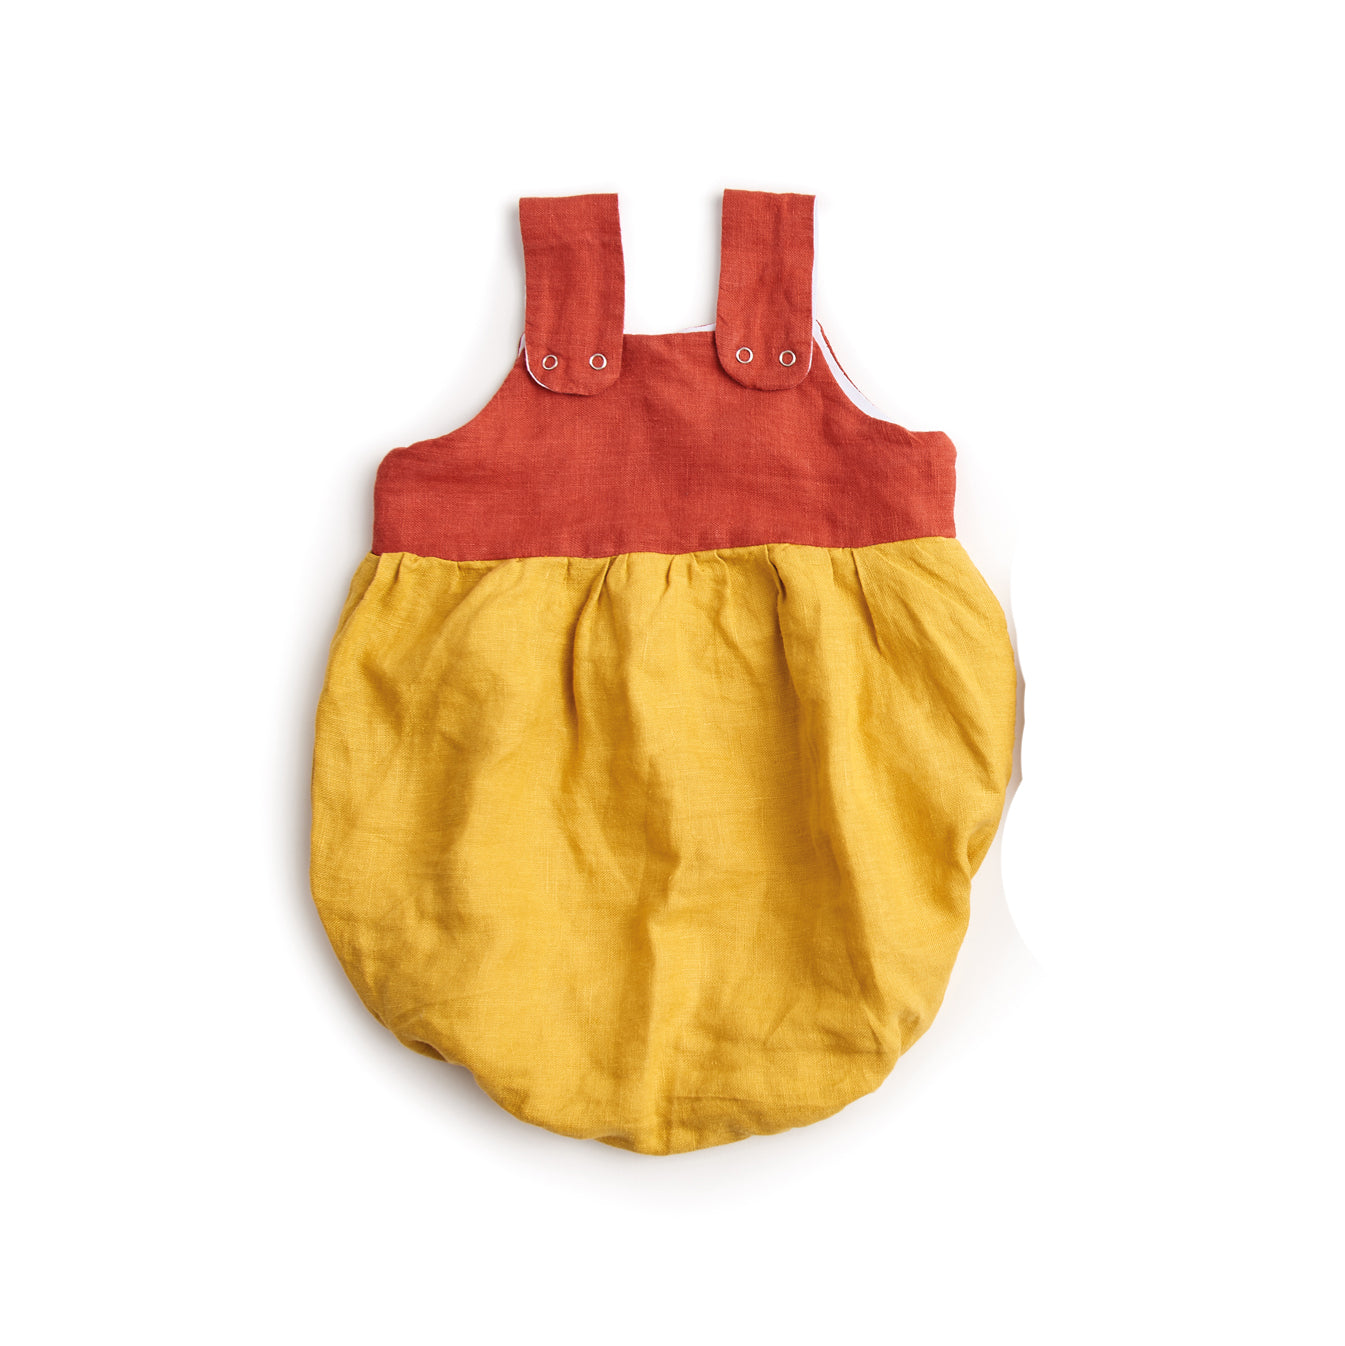 BOMBA Baby Romper in Red and Yellow